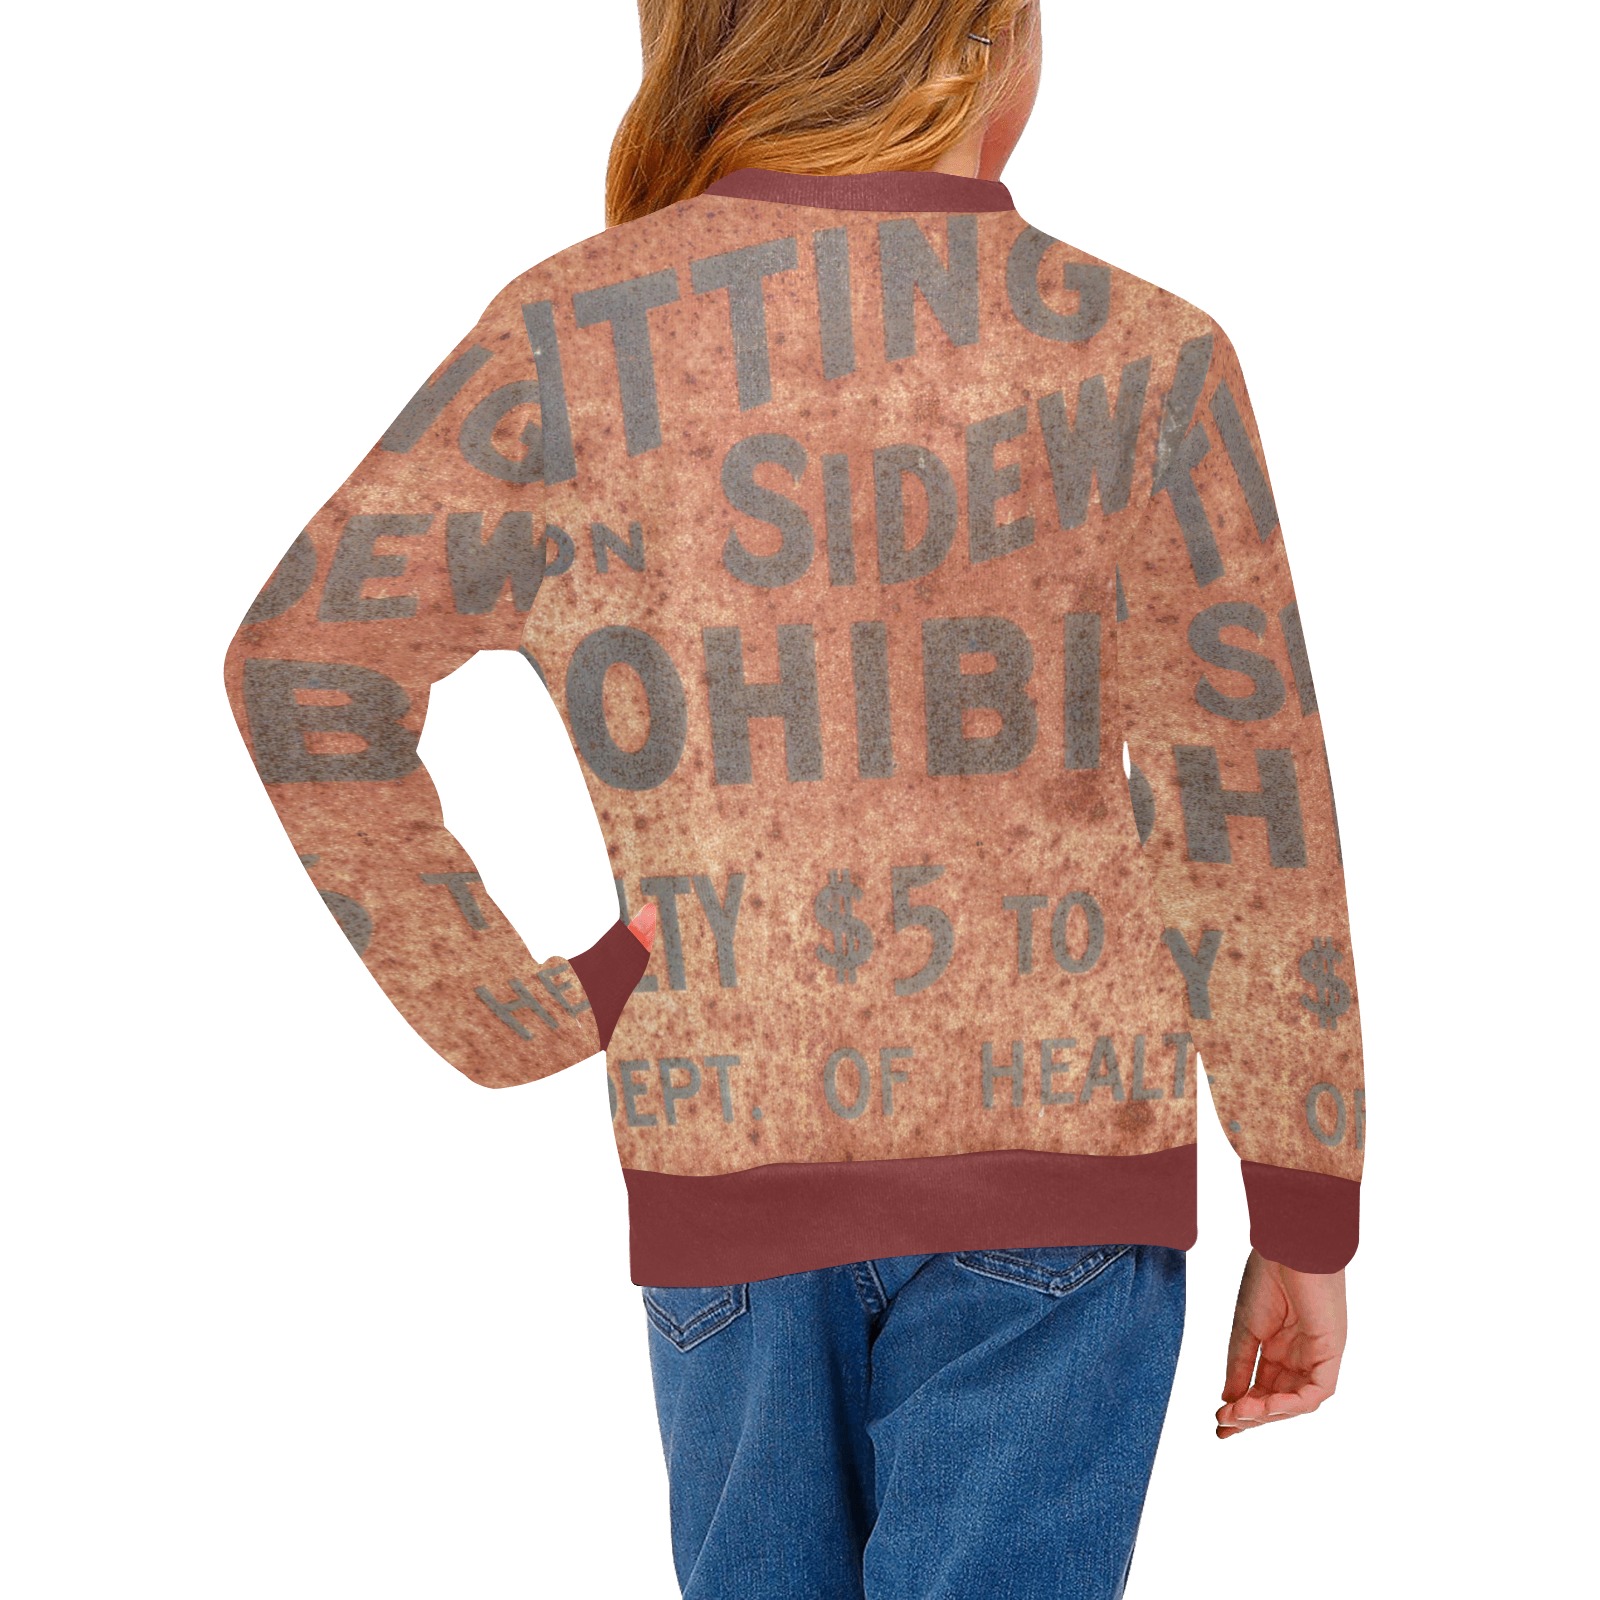 Spitting prohibited, penalty, photo Girls' All Over Print Crew Neck Sweater (Model H49)